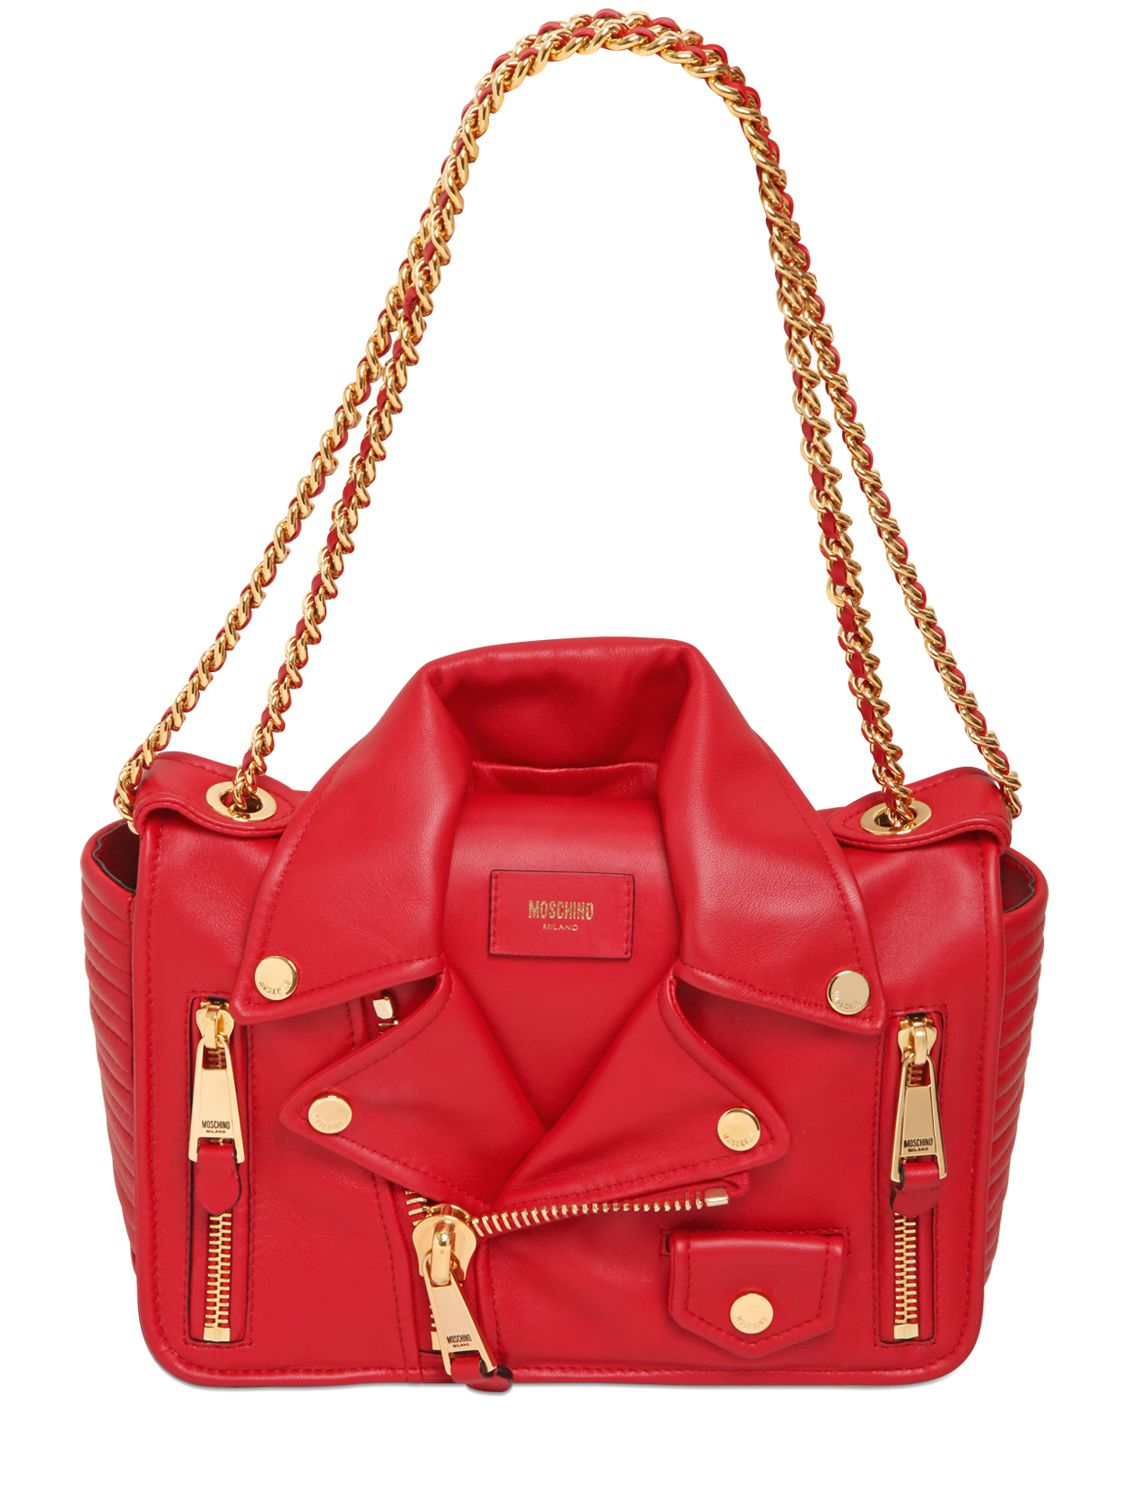 Moschino Biker Jacket Nappa Leather Shoulder Bag in Red - Lyst